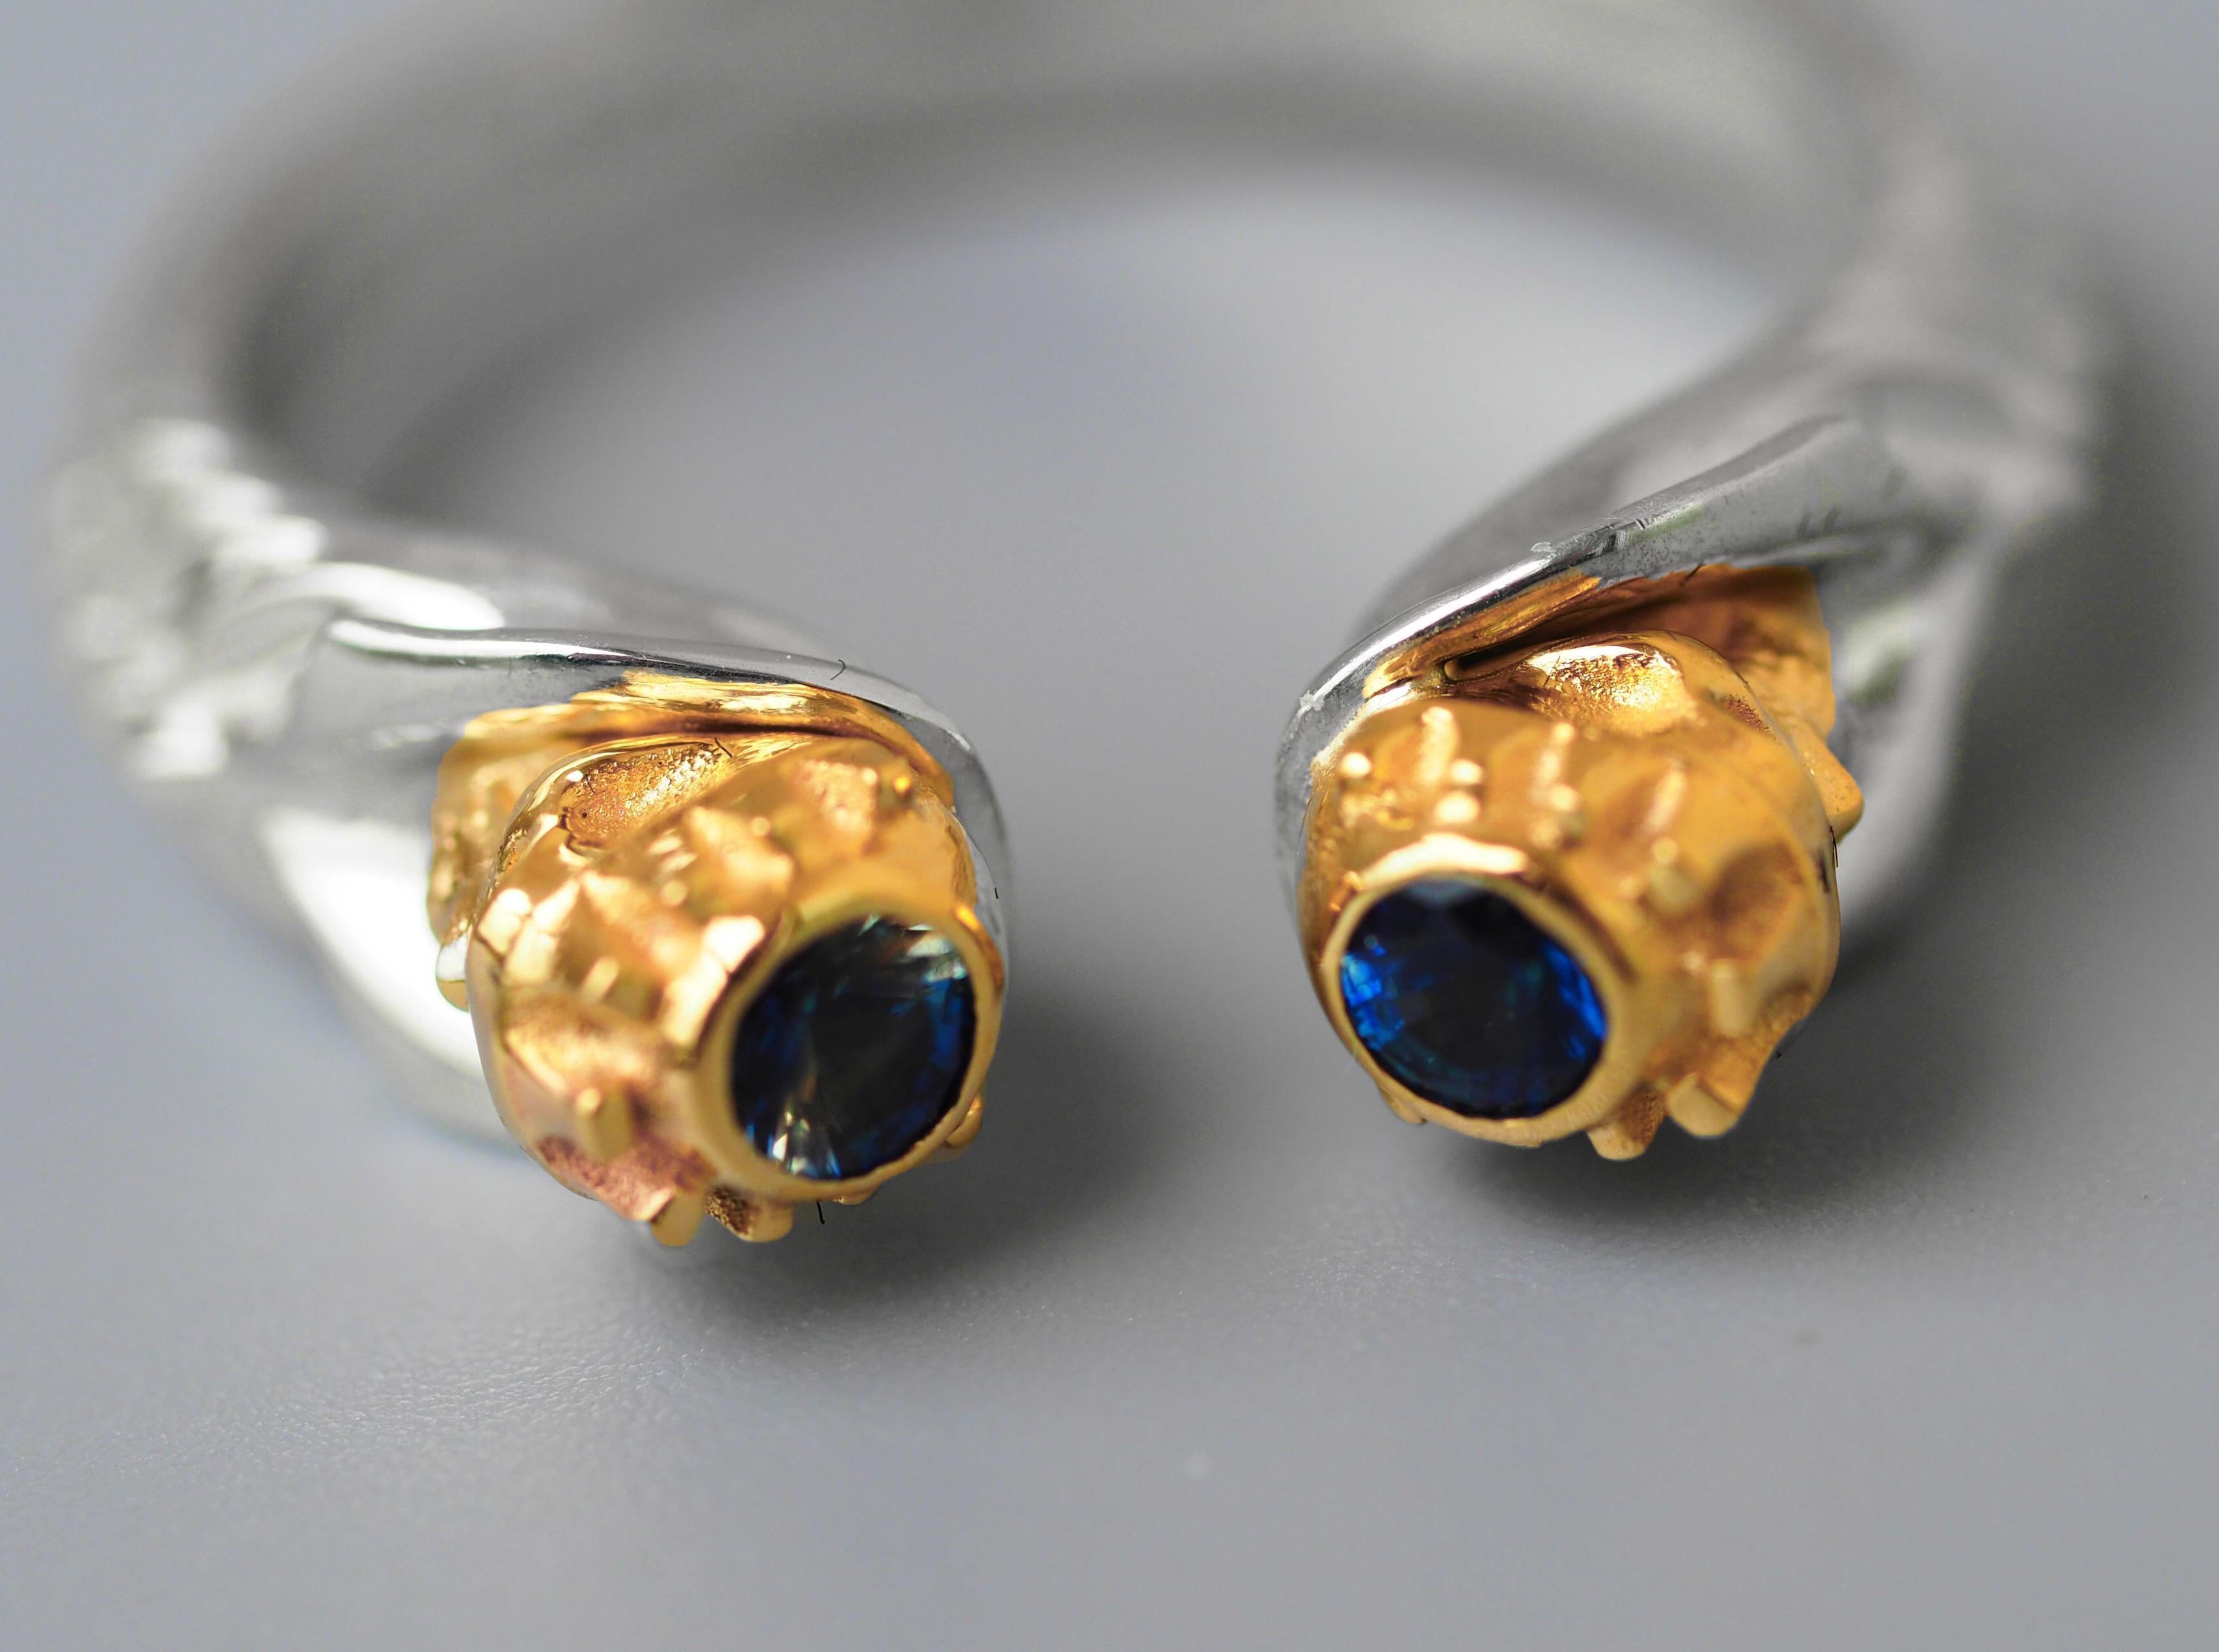 For Sale:  Scull ring with blue sapphires 8